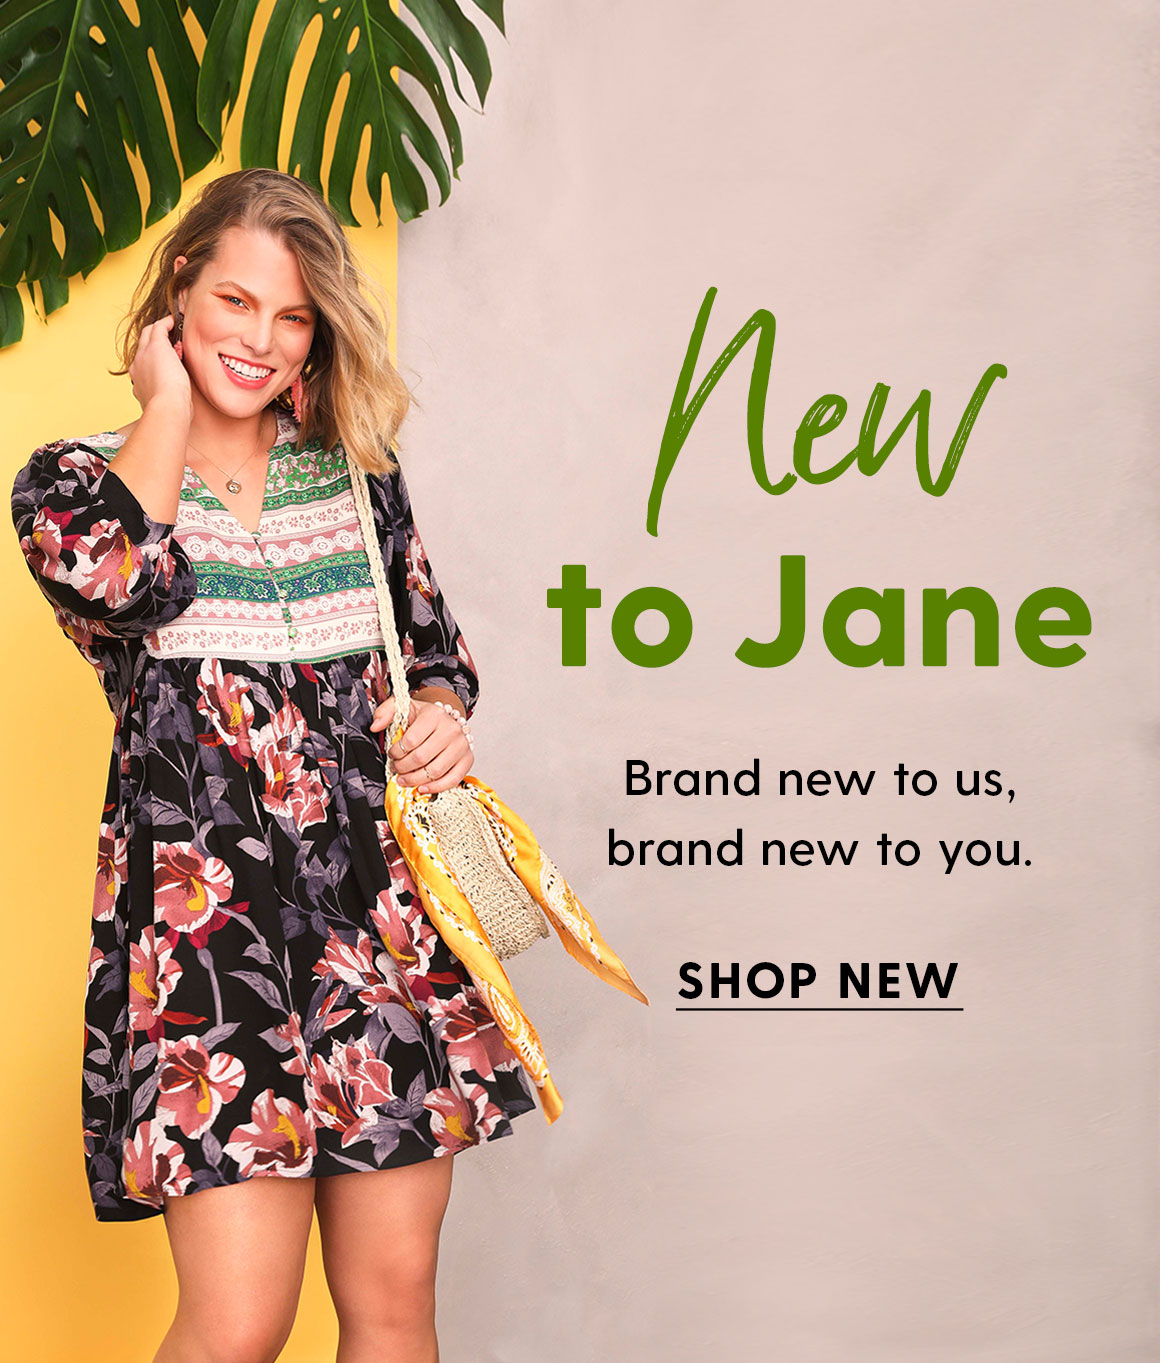 New to Jane. Brand new to us, brand new to you. Shop new.